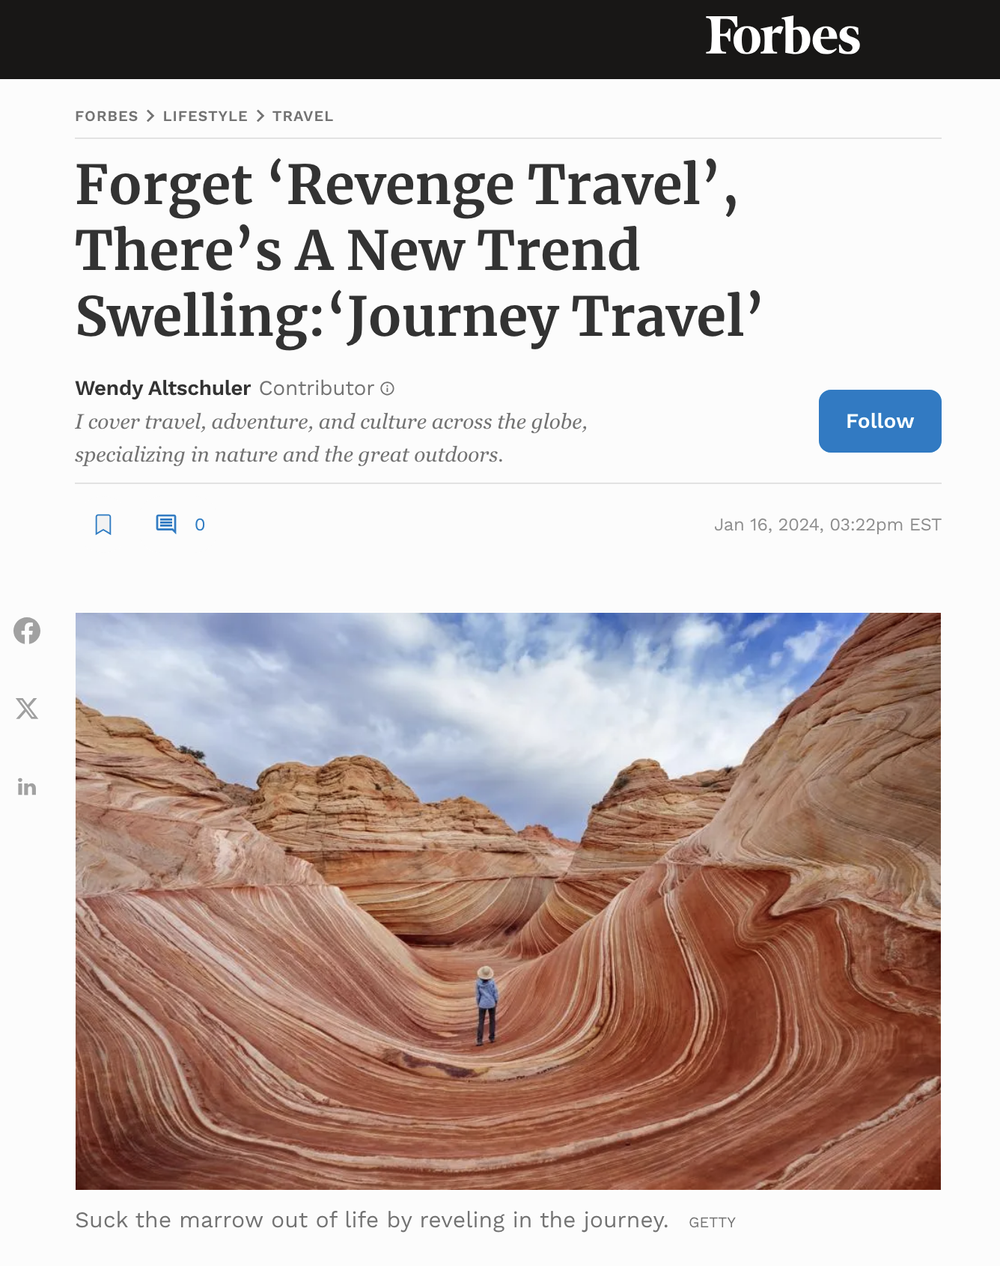 Forget 'Revenge Travel', There's a New Trend Swelling: 'Journey Travel'